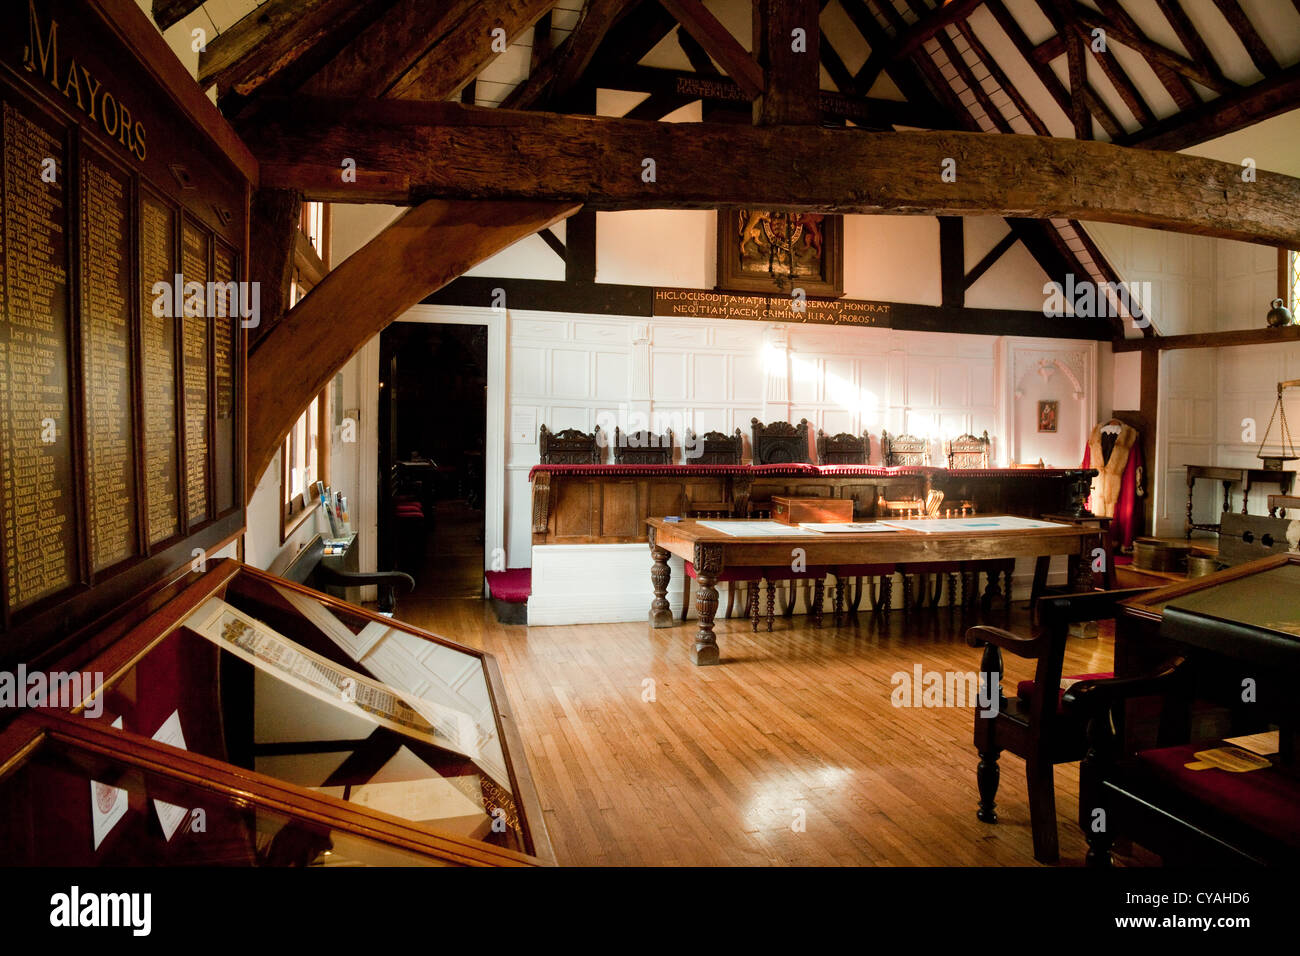 The interior of the medieval 16th century Guildhall building, Much Wenlock, Shropshire UK Stock Photo